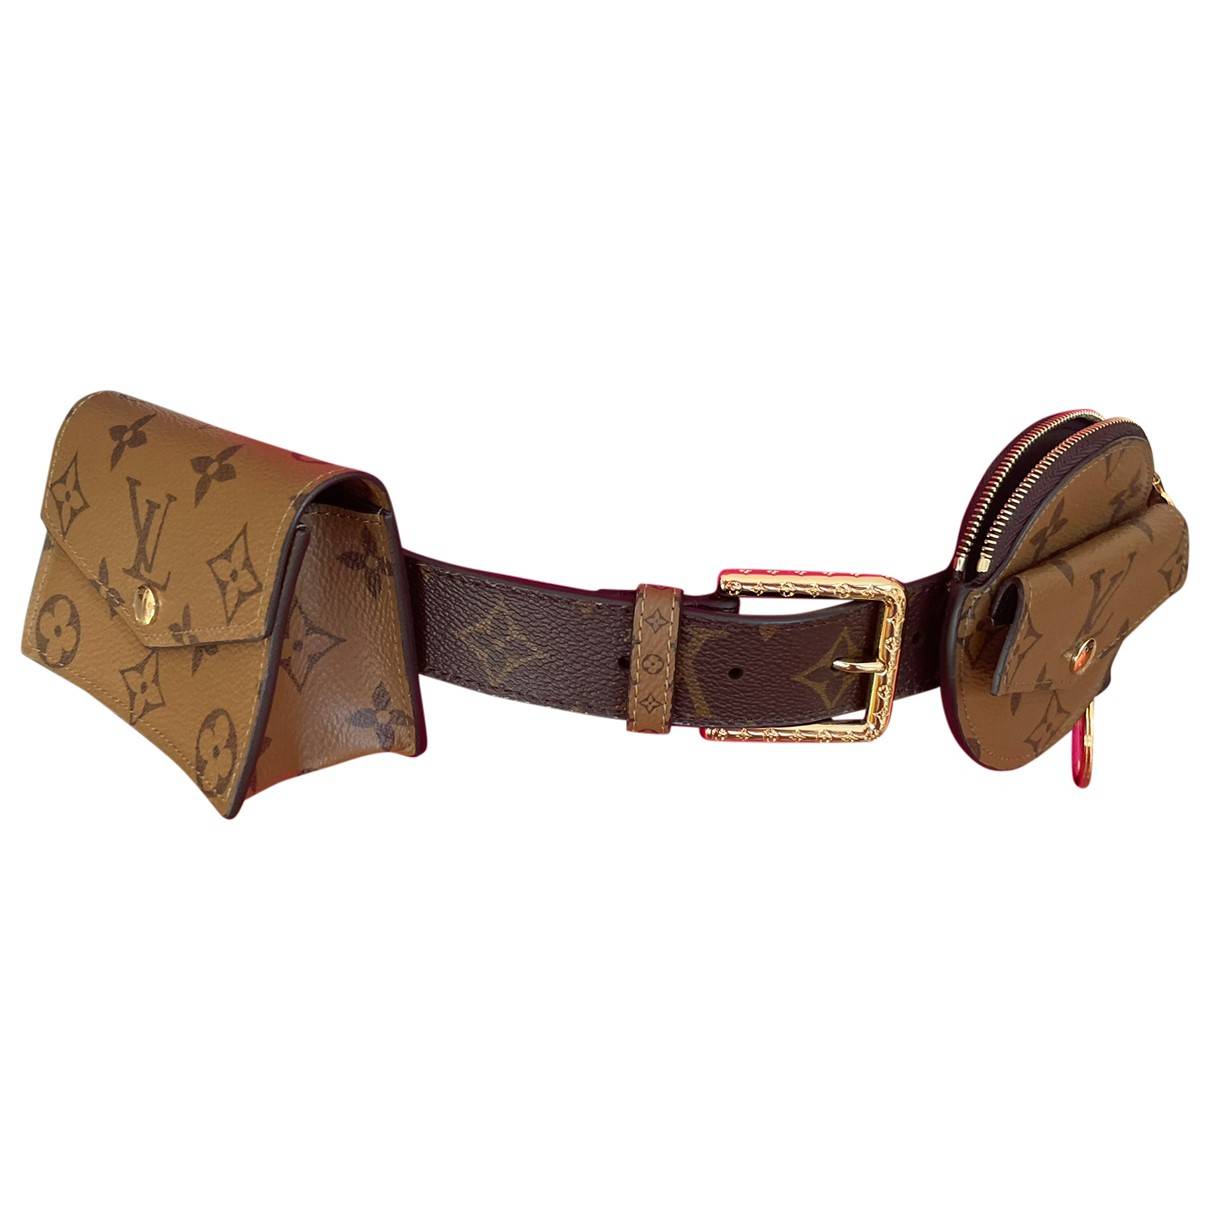 Daily multi pocket cloth belt Louis Vuitton Brown size 70 cm in